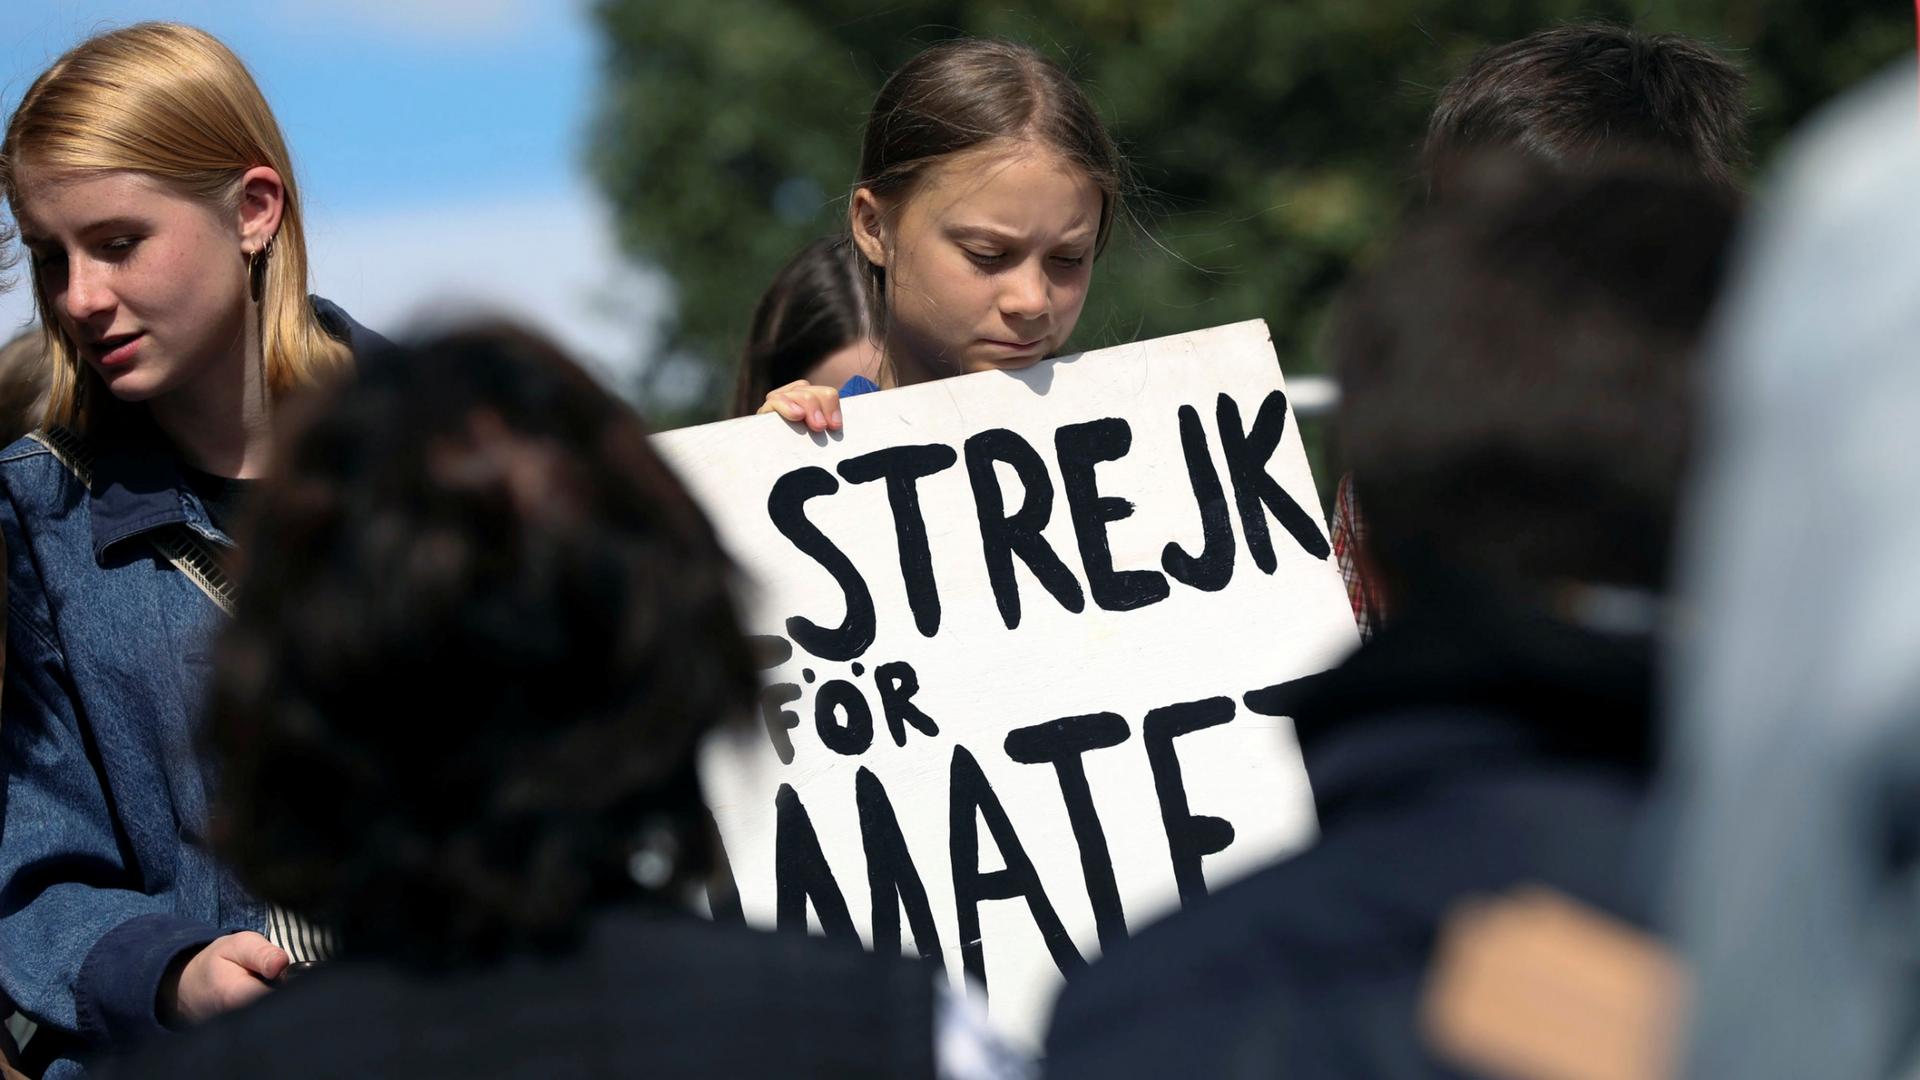 Climate change environmental teen activist Greta Thunberg participates in a climate strike rally and looks down at a placard 